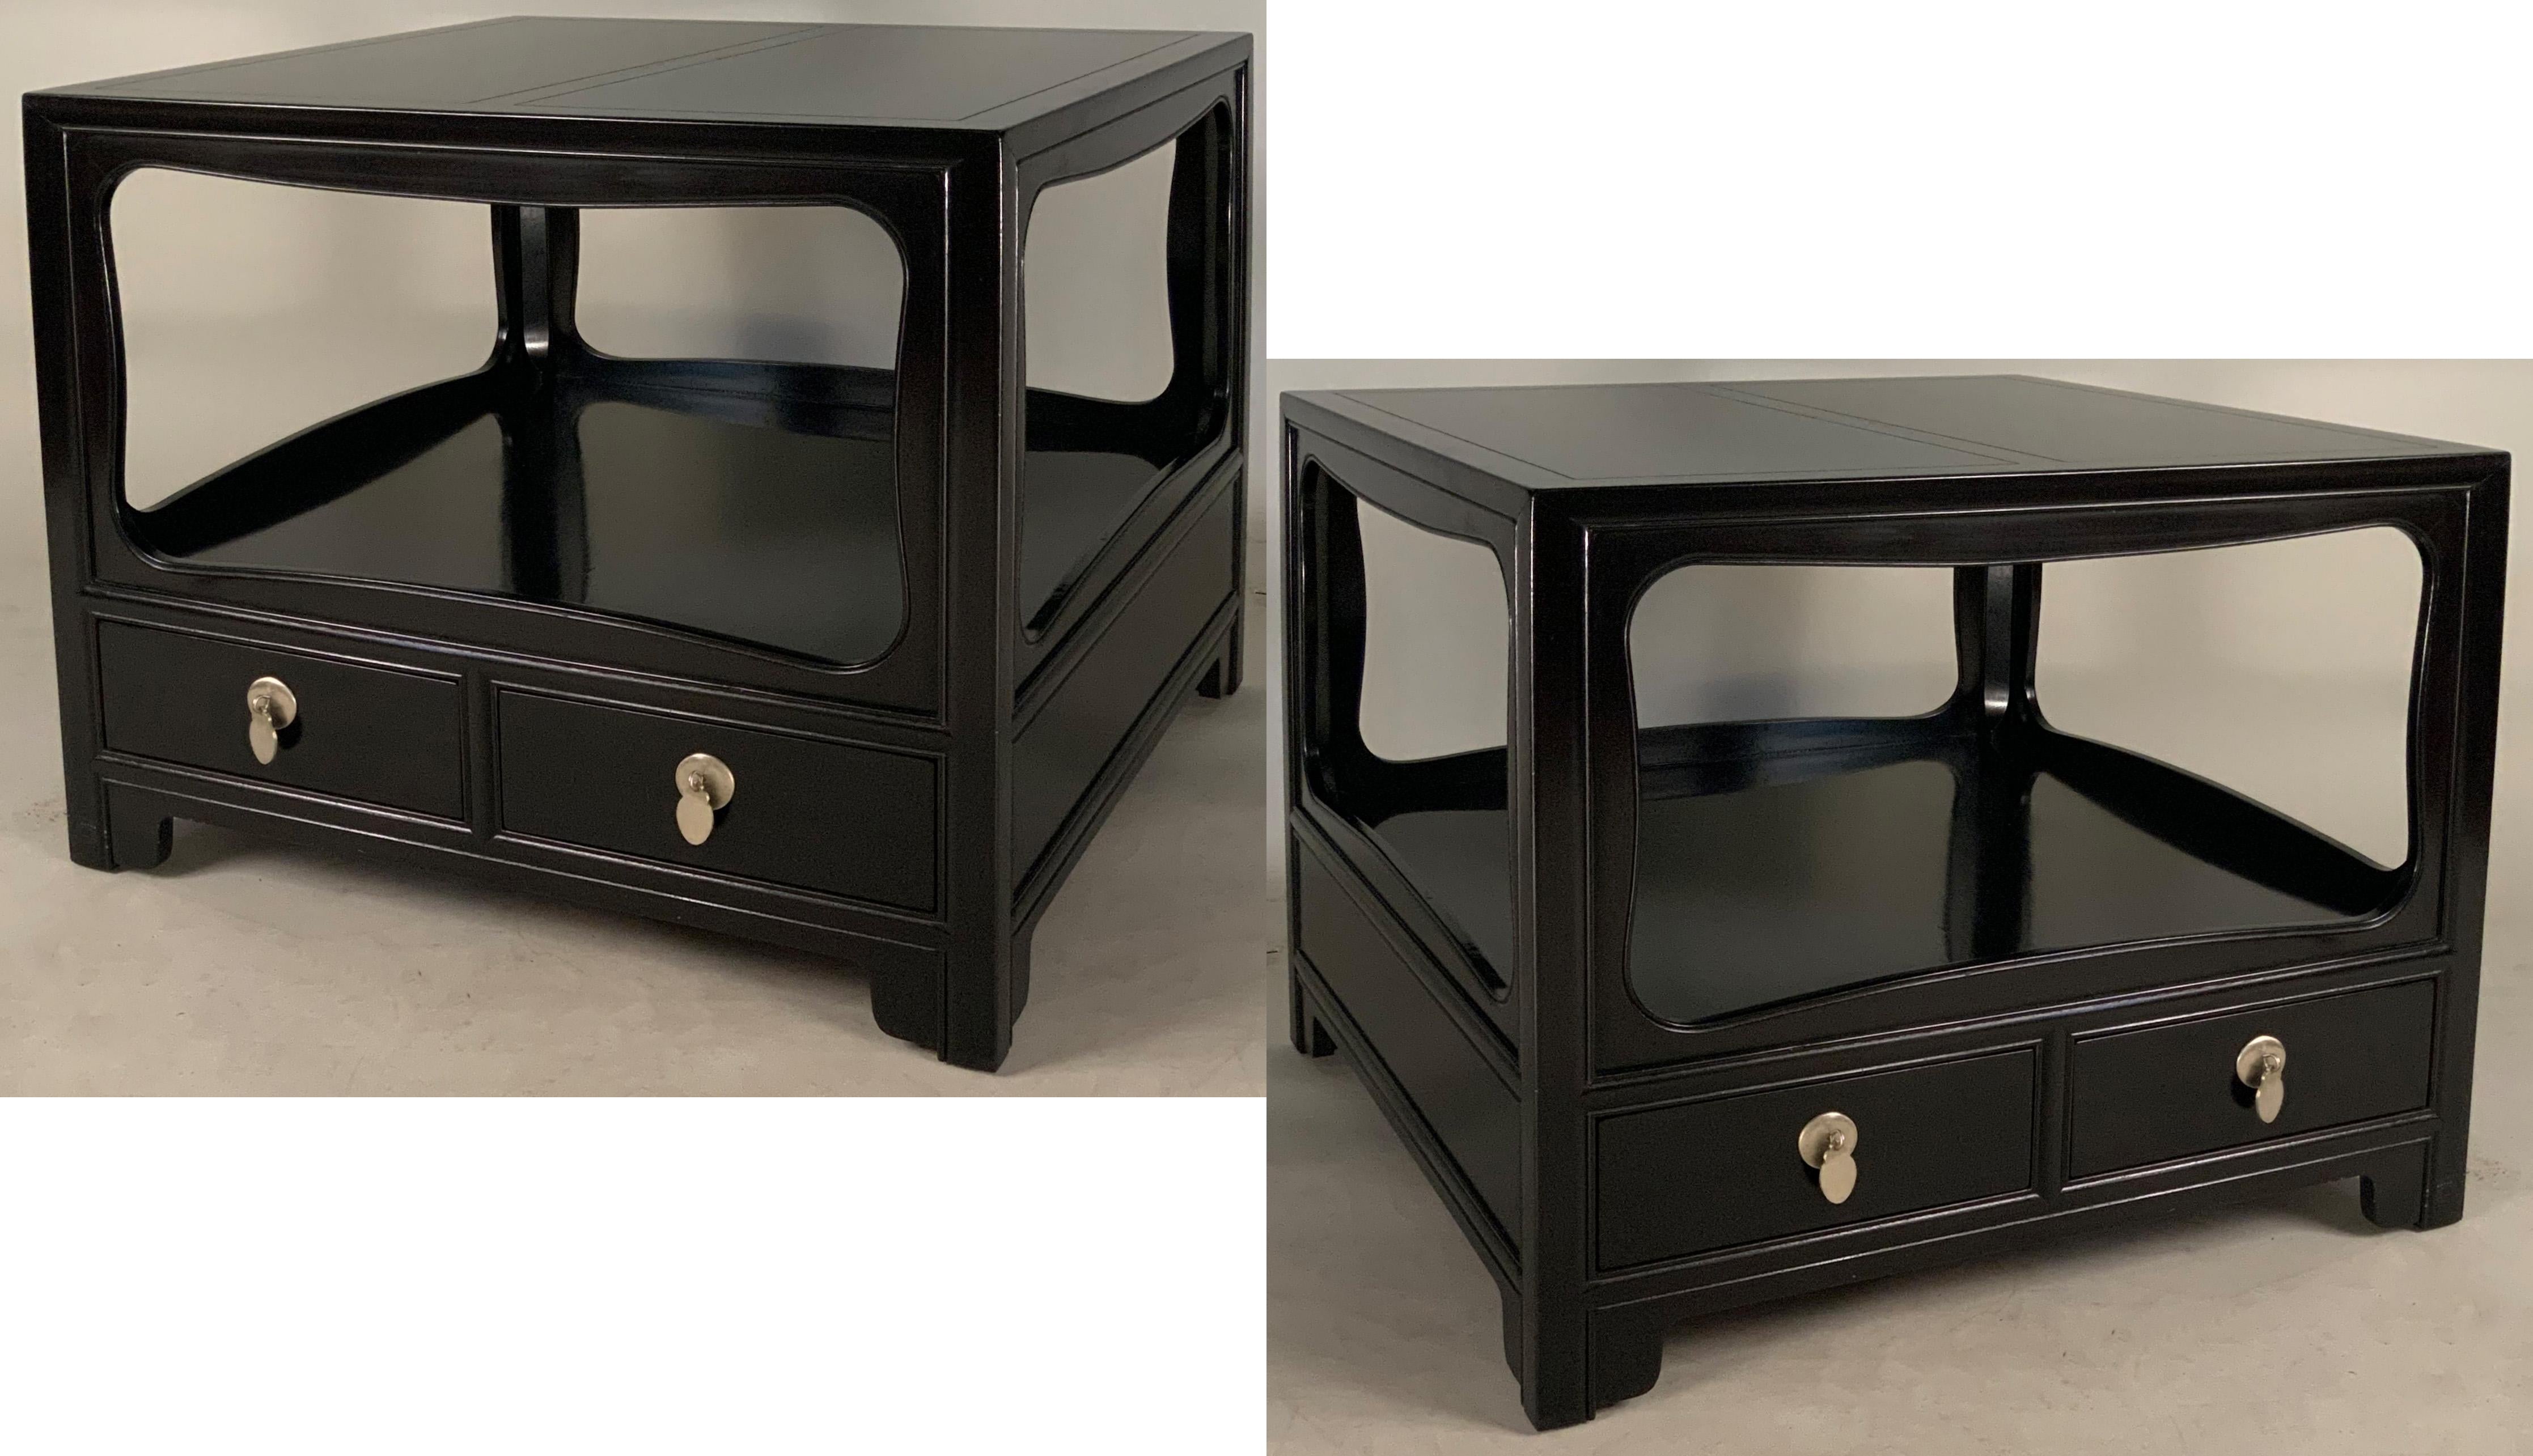 A very handsome pair of large open cube ebonized nightstands designed by Michael Taylor for Baker, circa 1960s. Beautiful design with elegant details and polished steel tab drawer pulls.